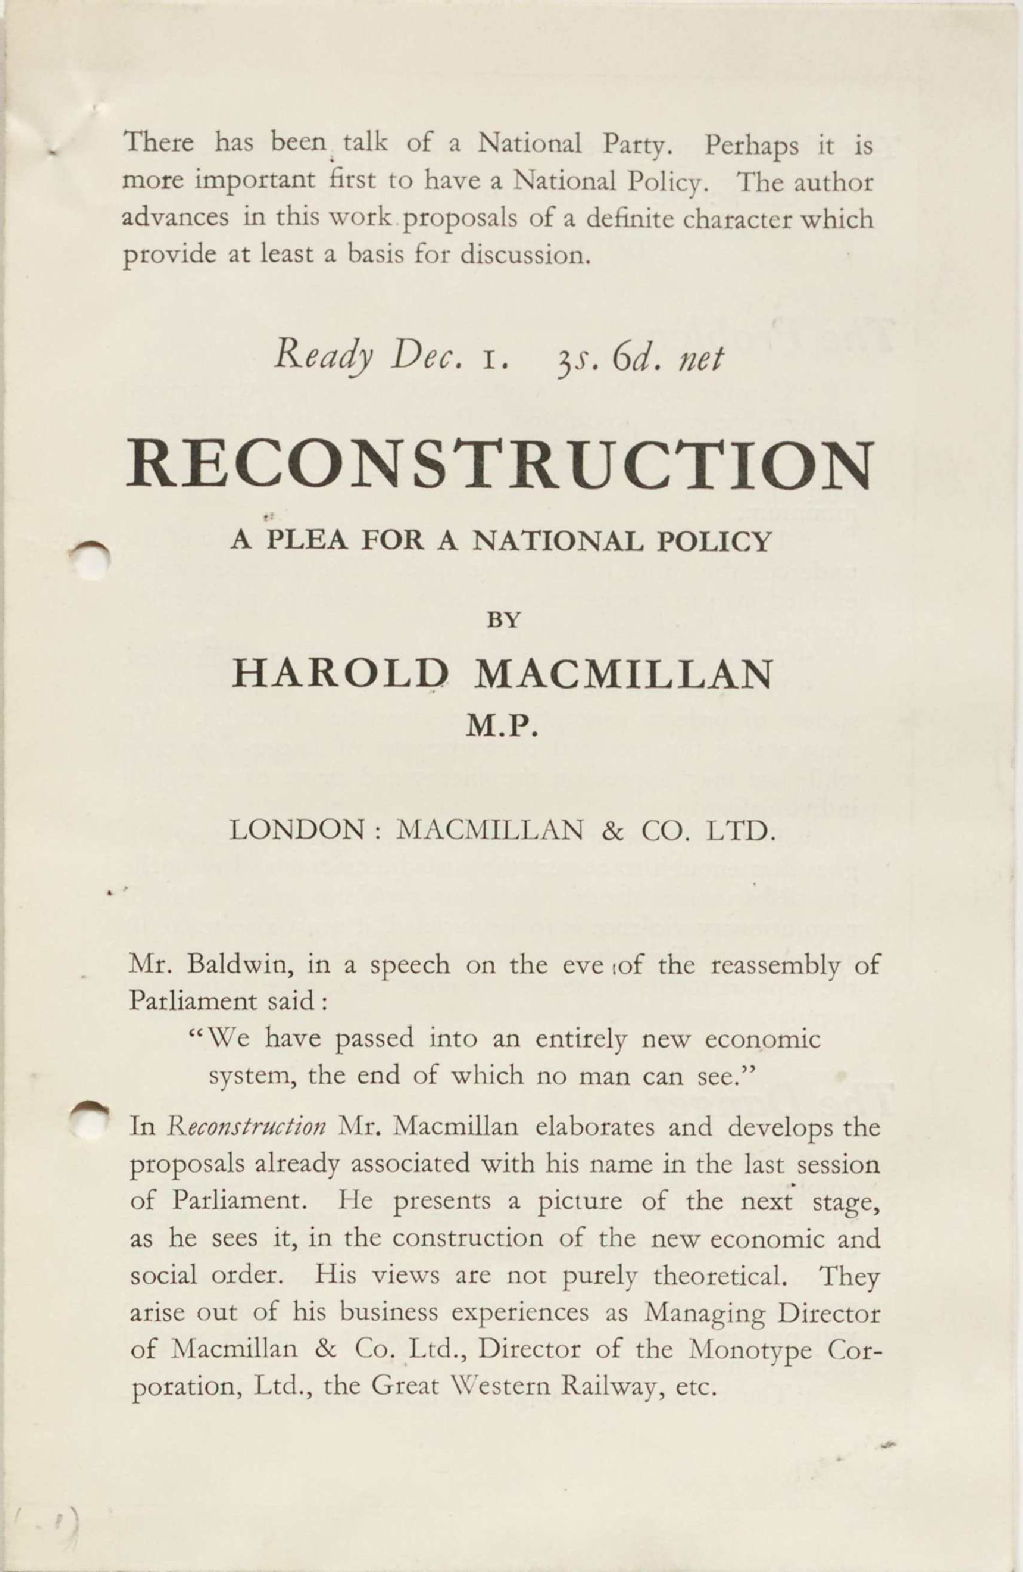 Reconstruction: a plea for a national policy, 1933